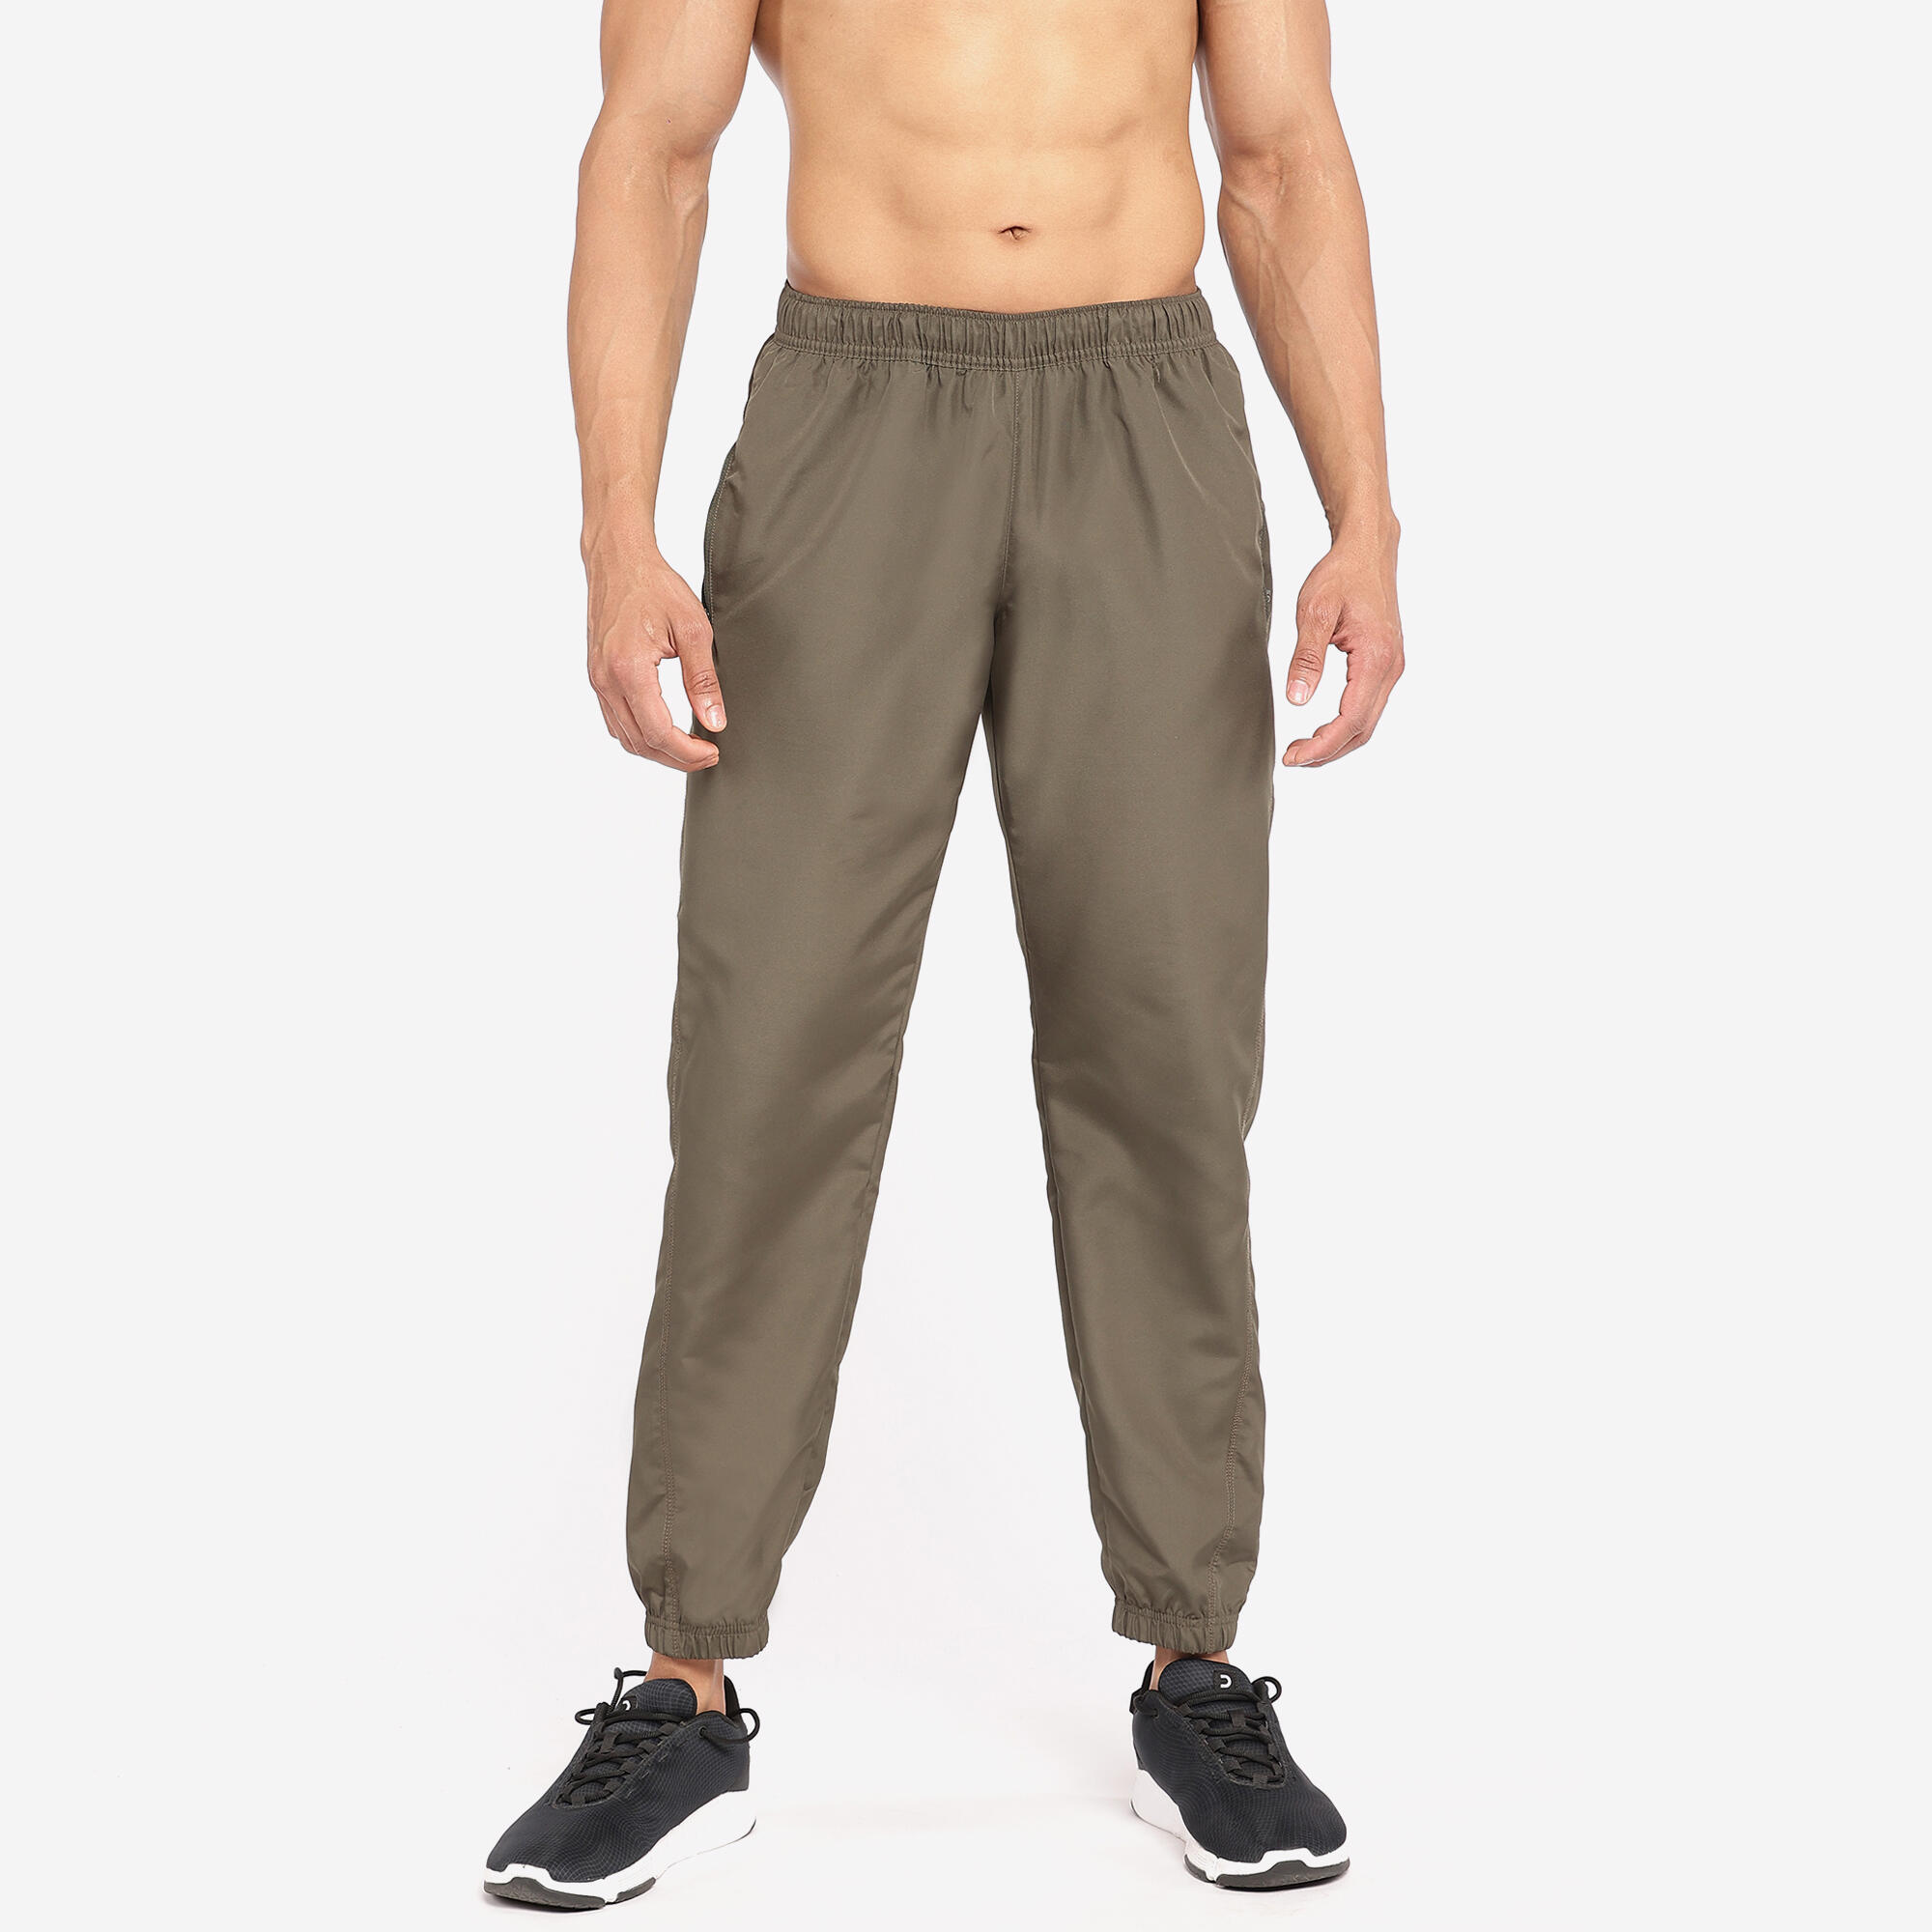 Buy High-Quality Black Polyester Track Pants For Men at Jeffa – JEFFA